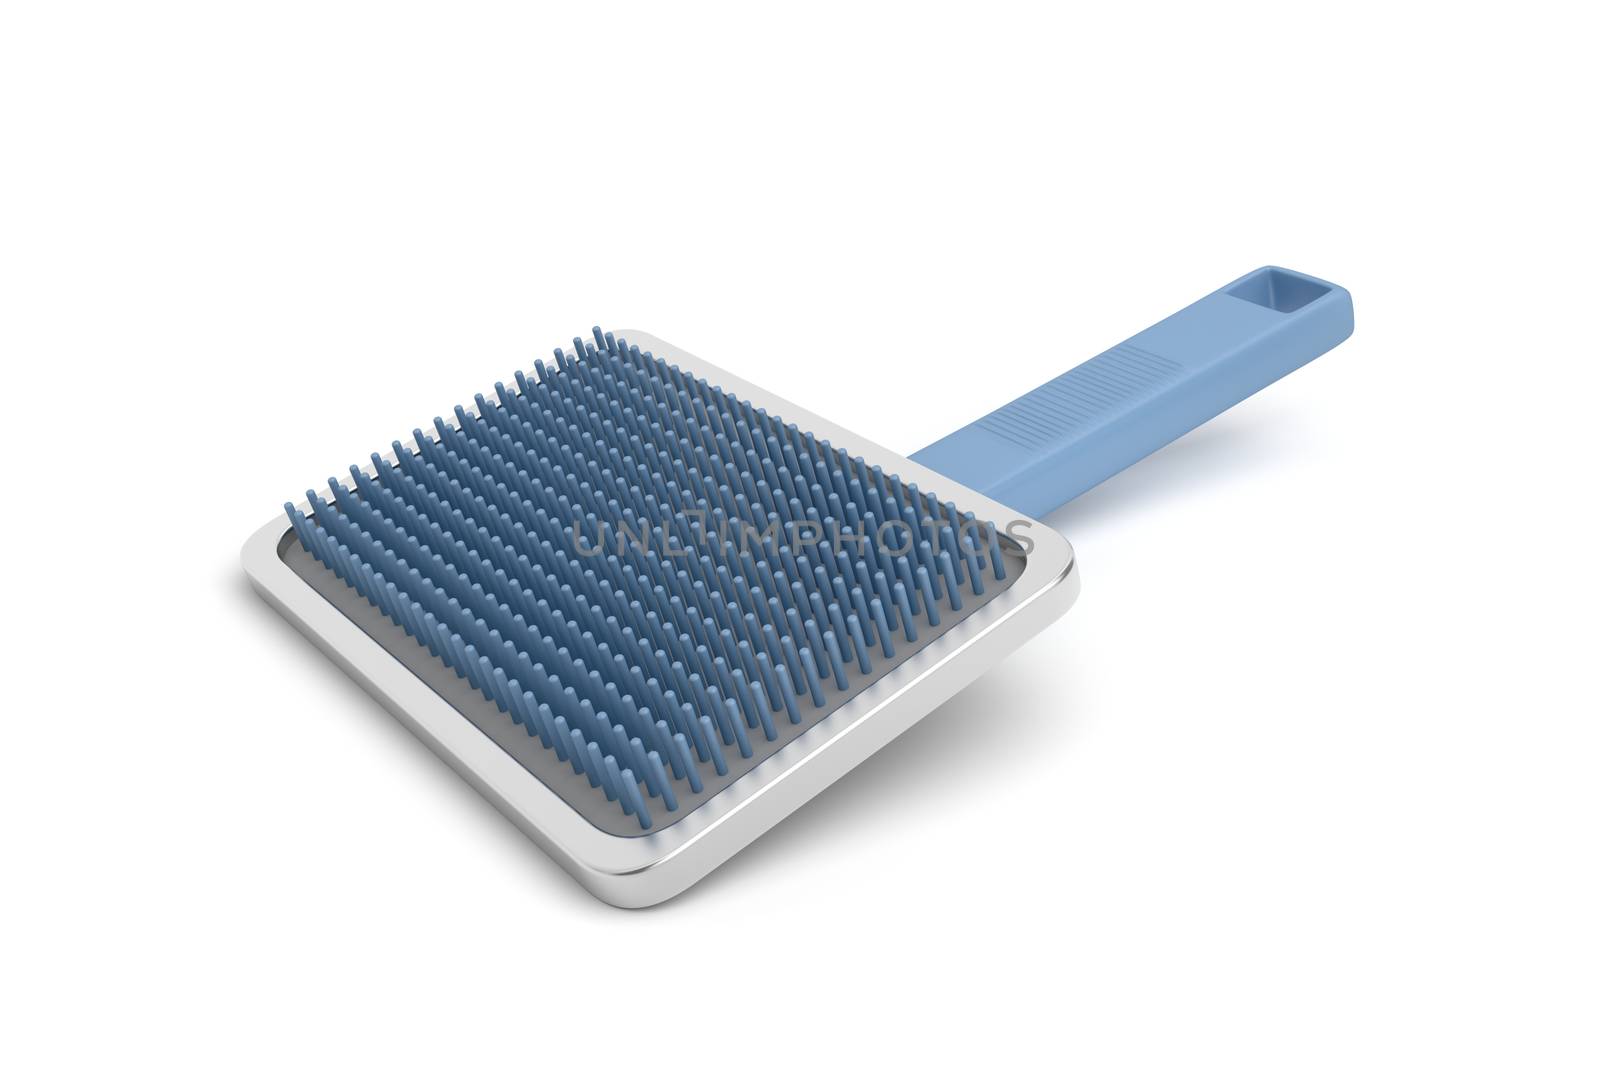 Comb for animals on white background